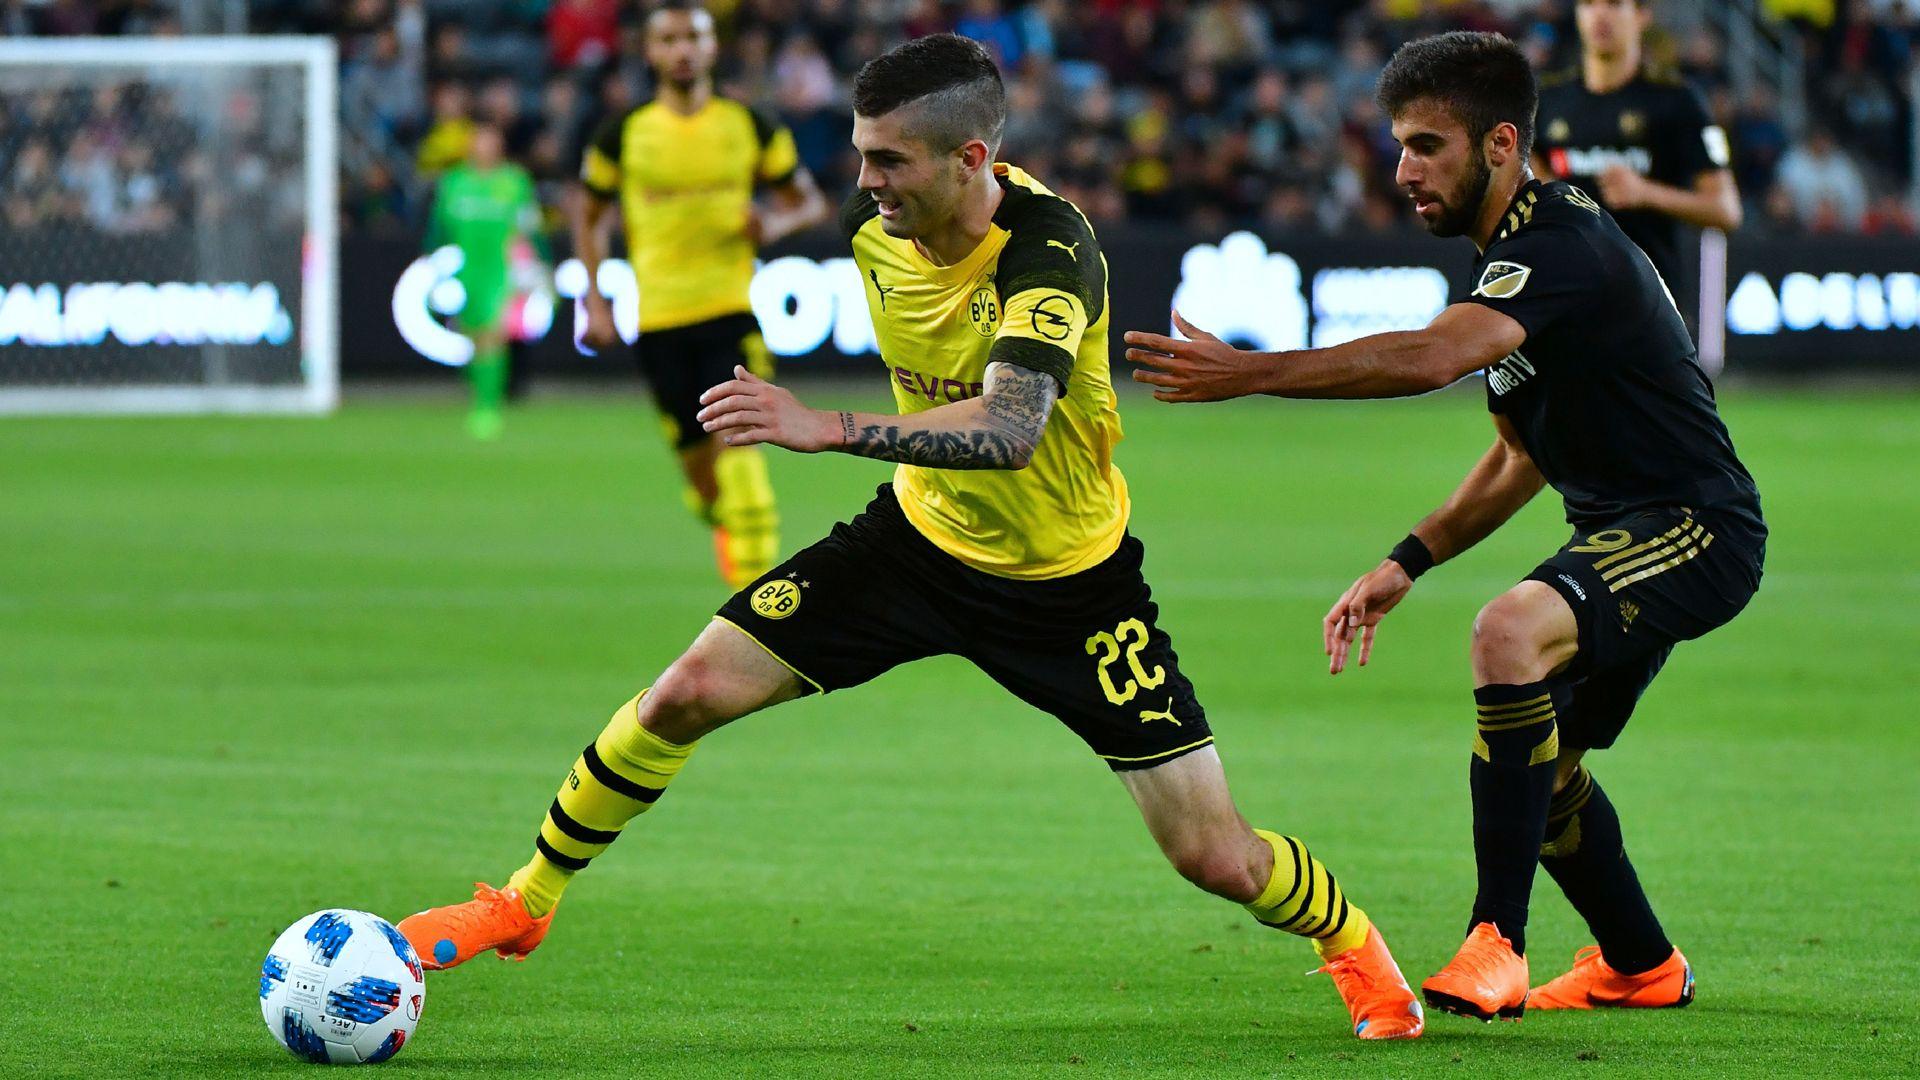 Christian Pulisic and Borussia Dortmund draw with Los Angeles FC